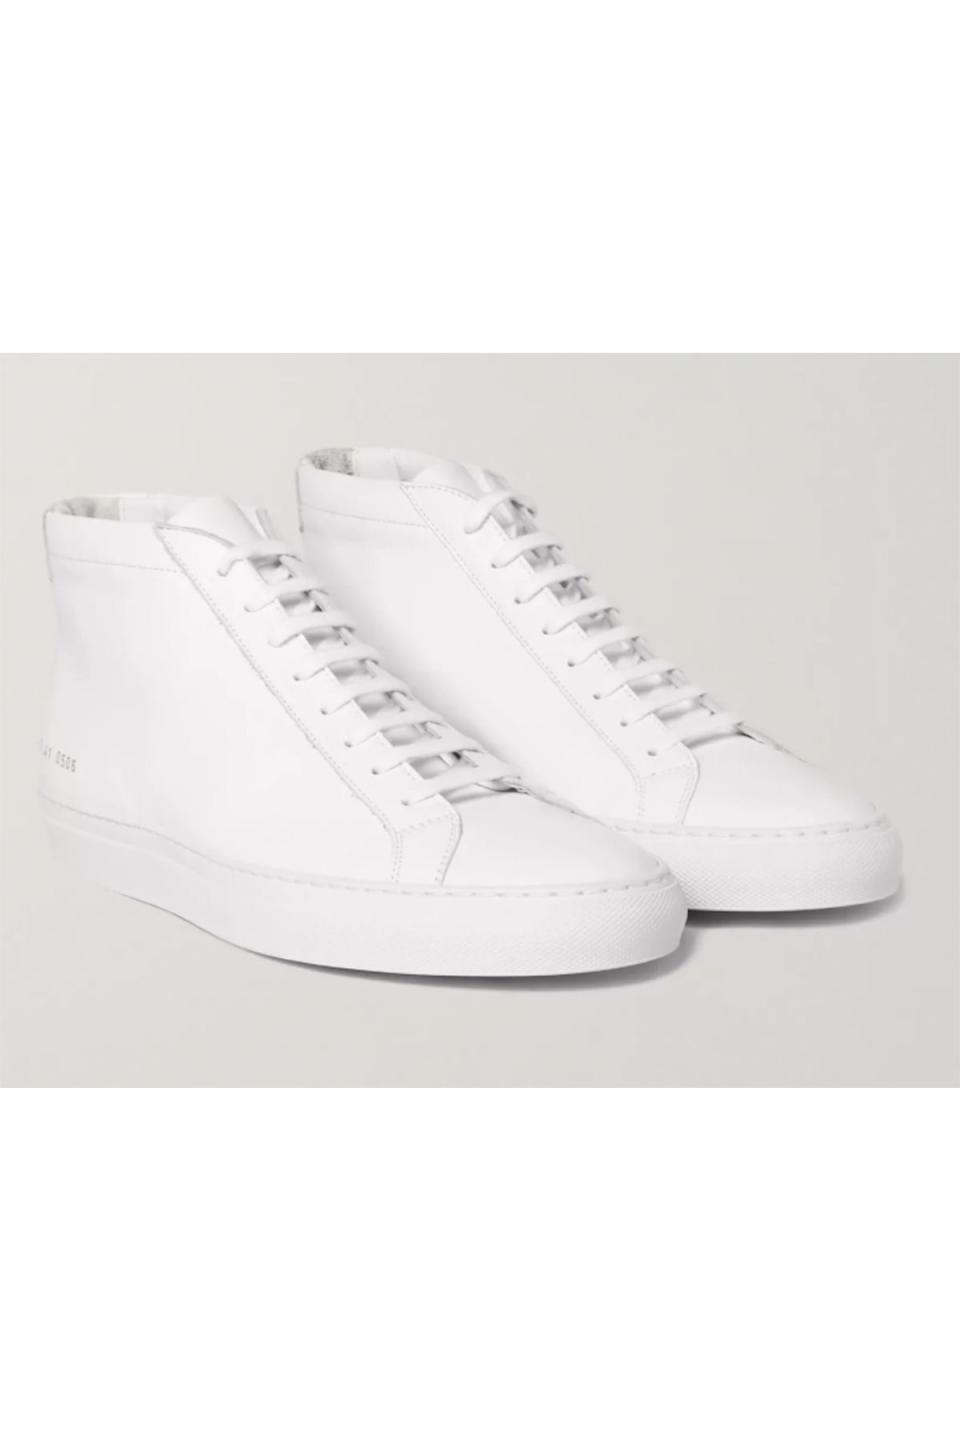 3) Original Achilles Leather High-Top Sneakers